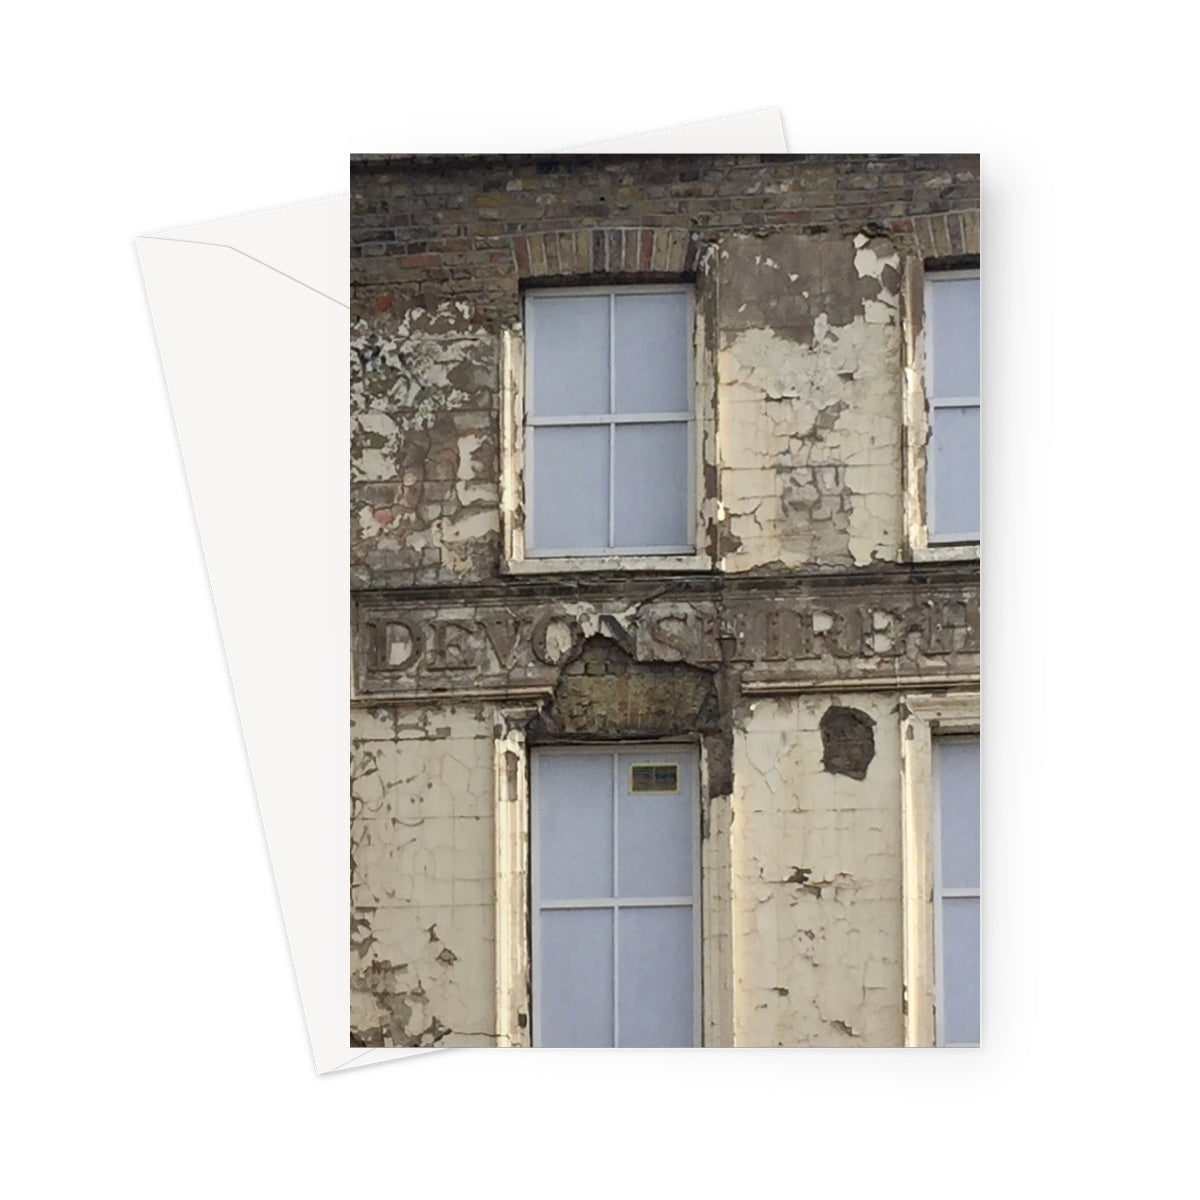 Closeup of Devonshire House in Southwark, pre-restoration, showing broken plasterwork and peeling paint in this greeting card